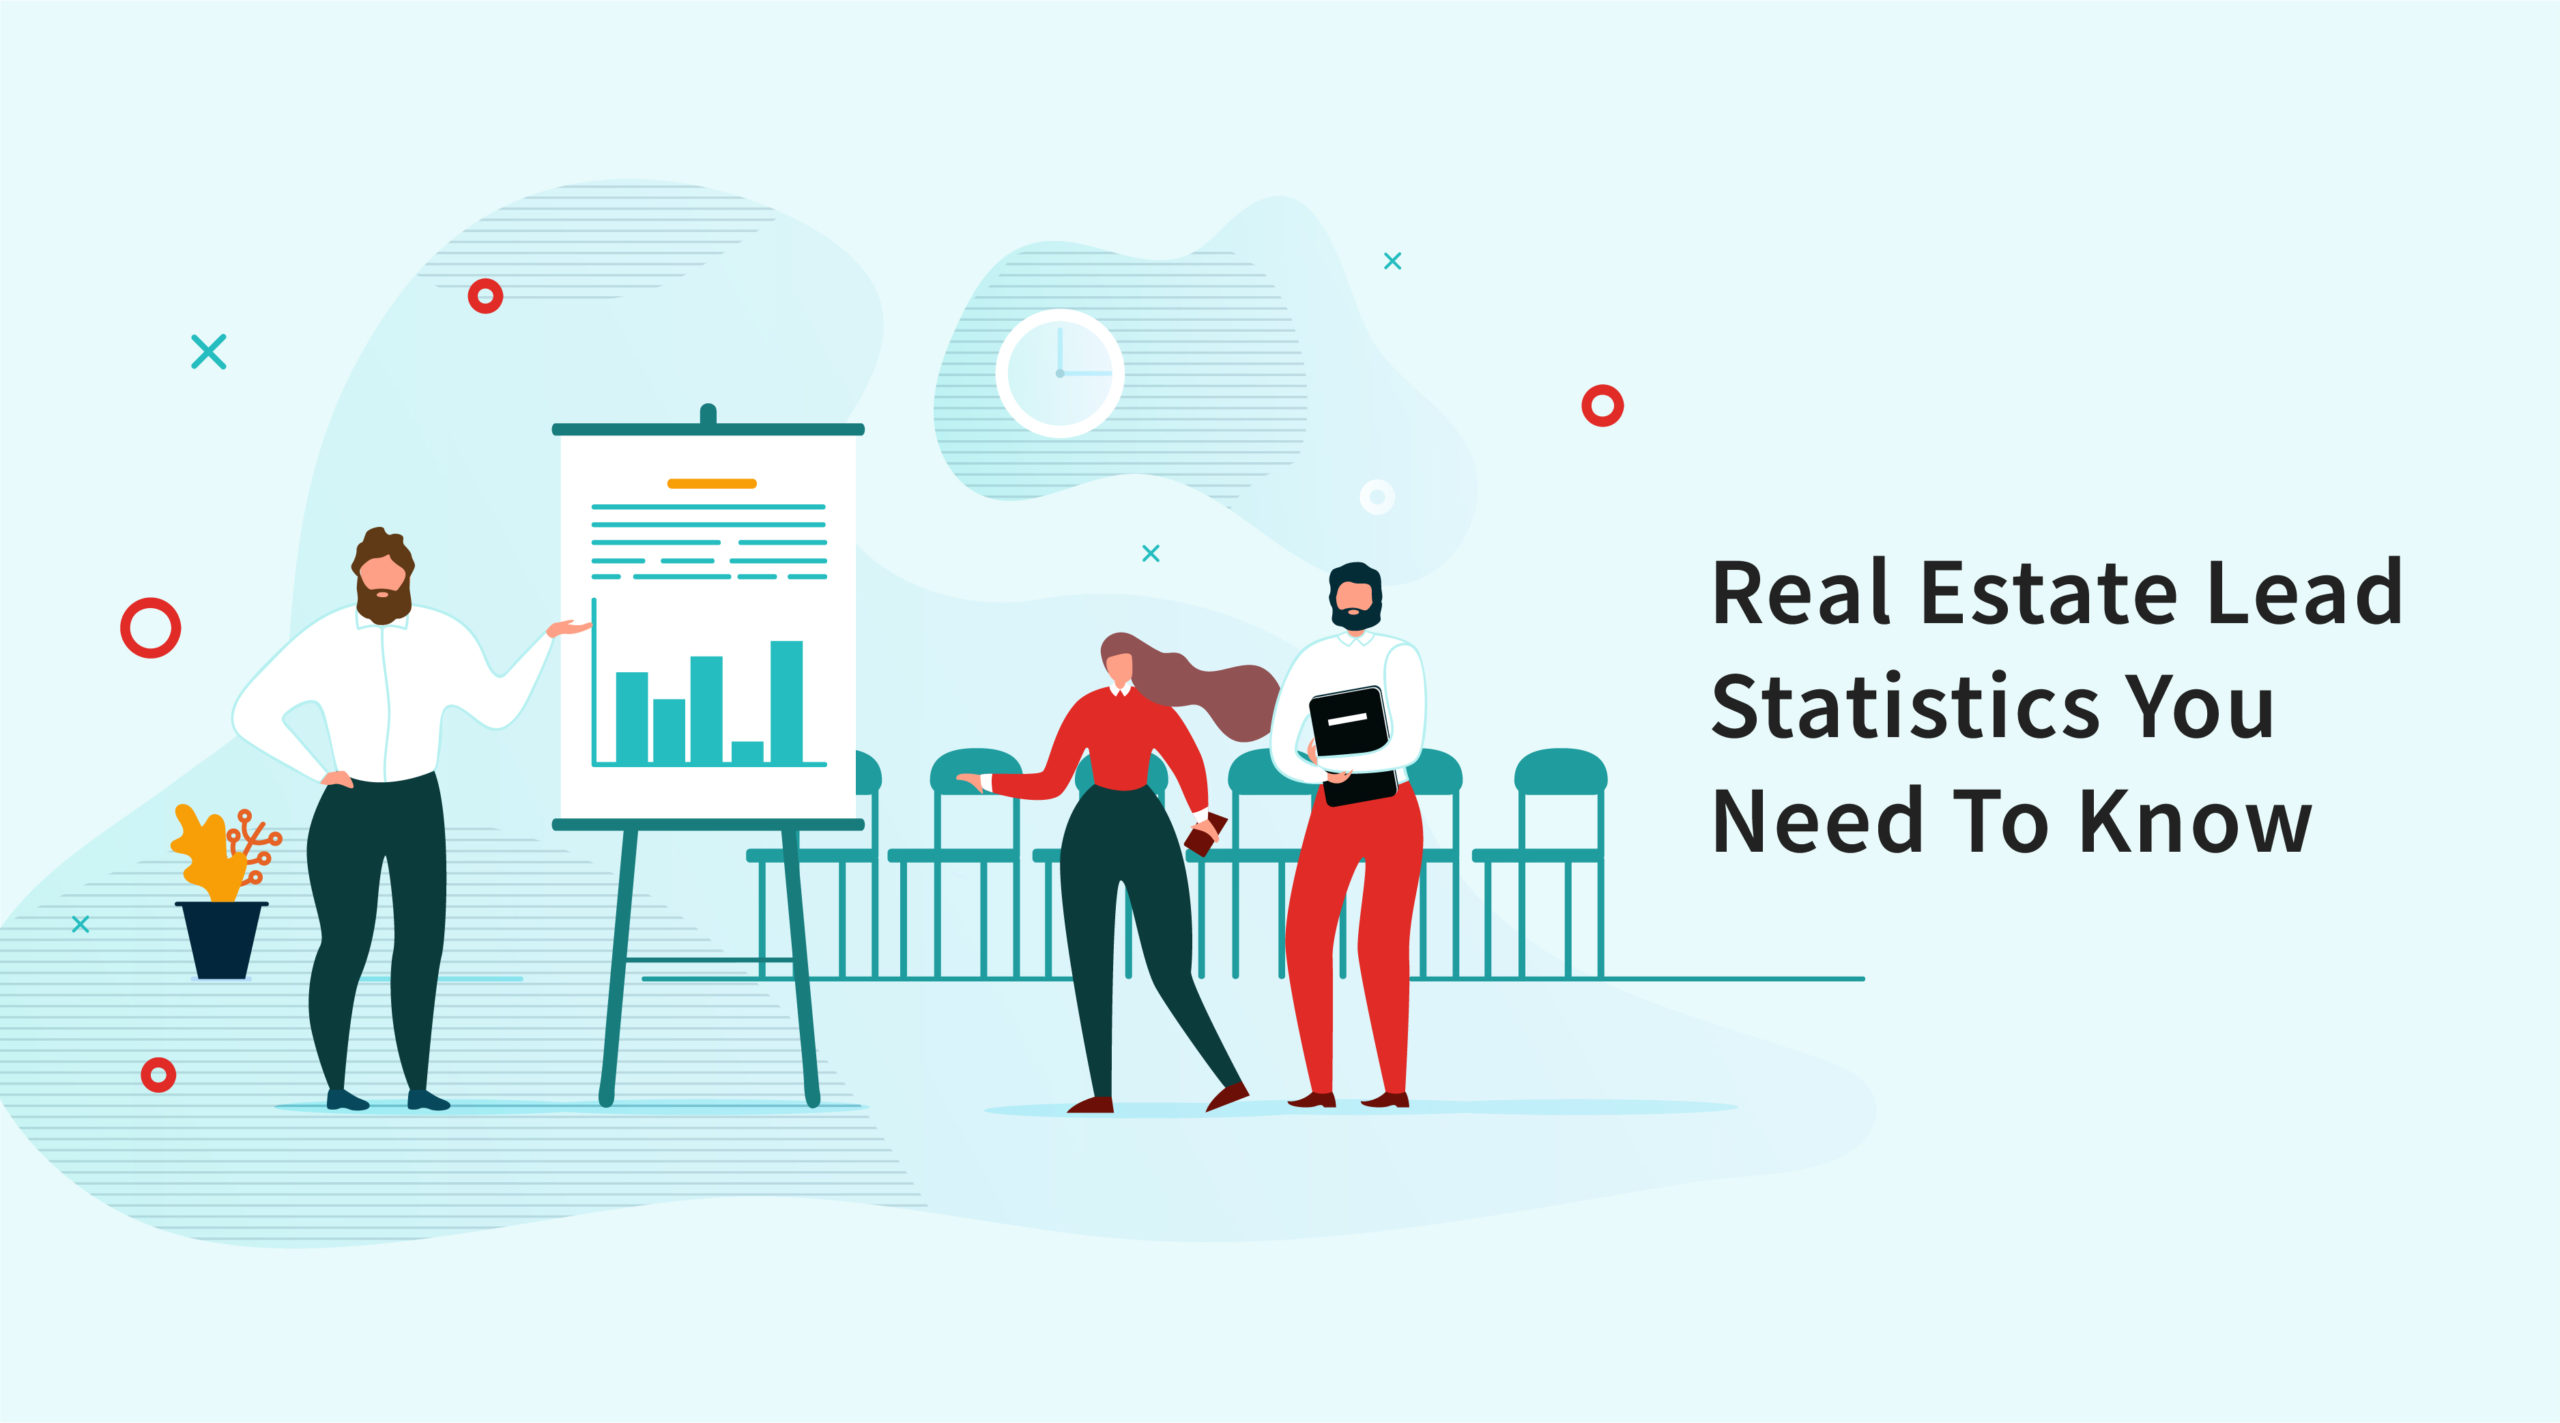 10 Real Estate Lead Statistics You Need To Know